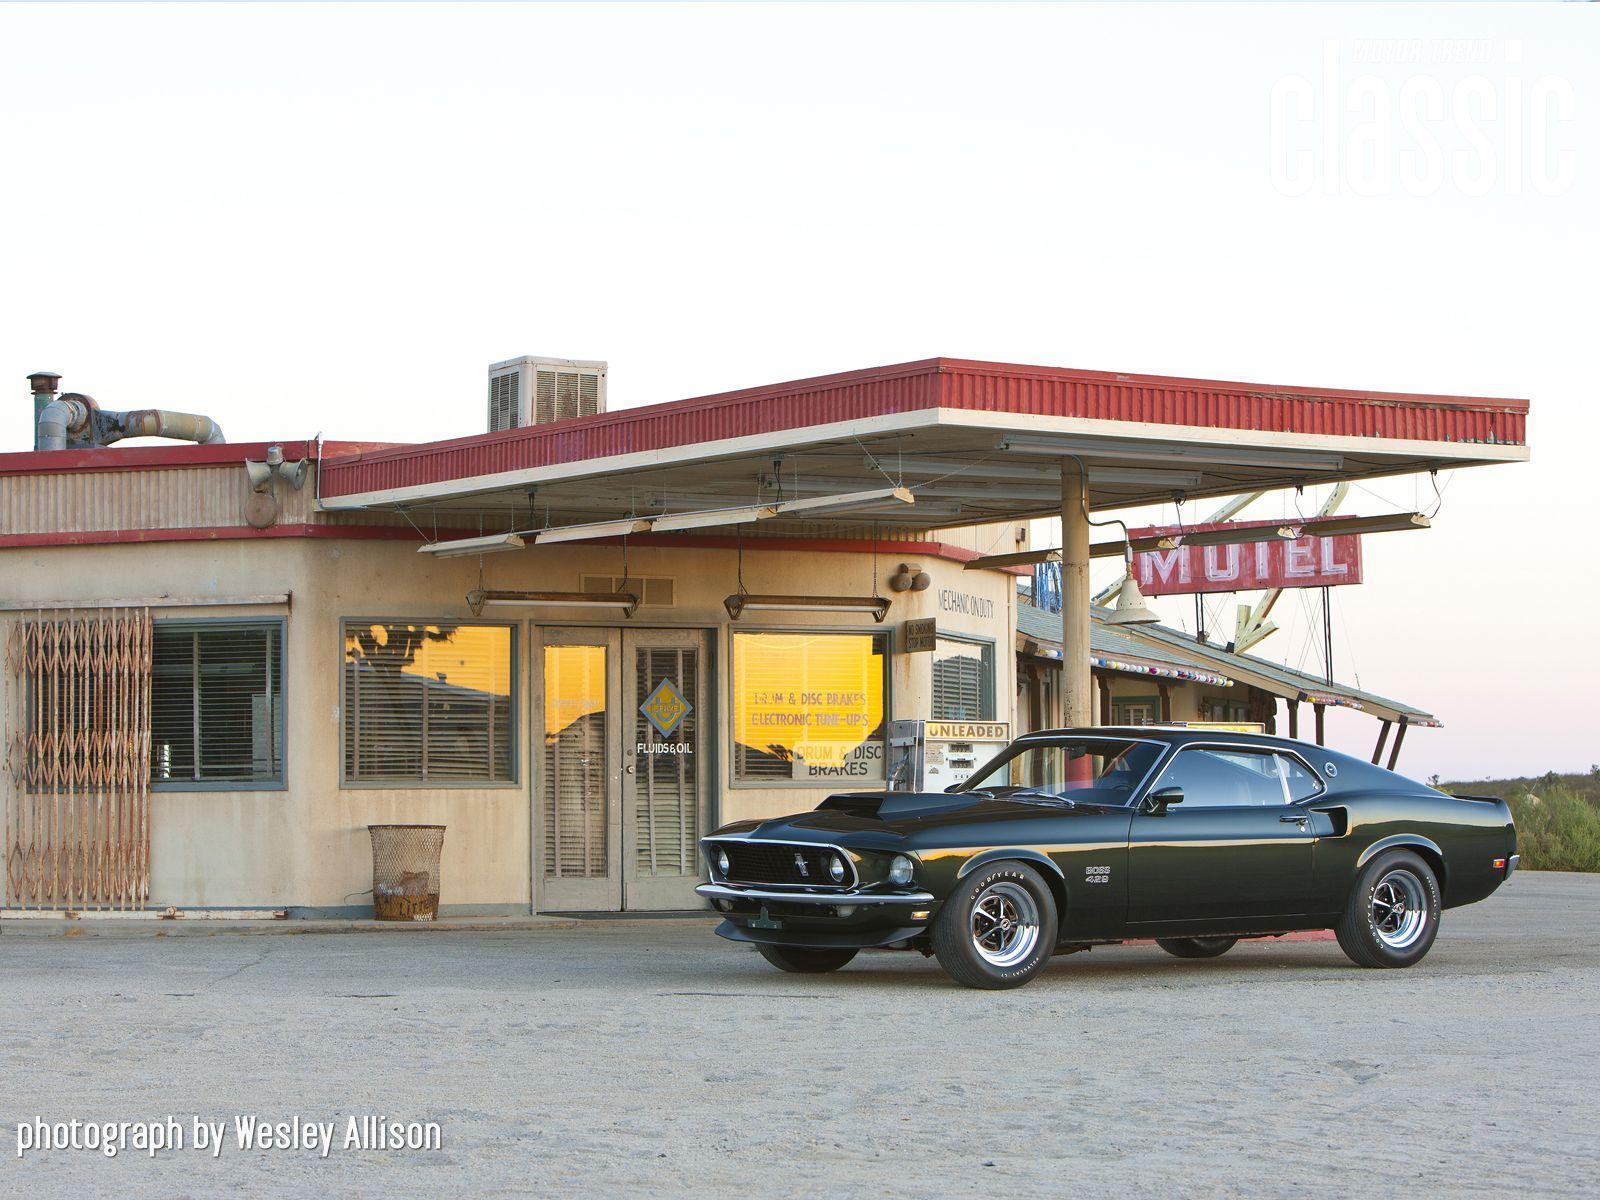 Ford Mustang Boss 429 Wallpaper Gallery Trend Classic